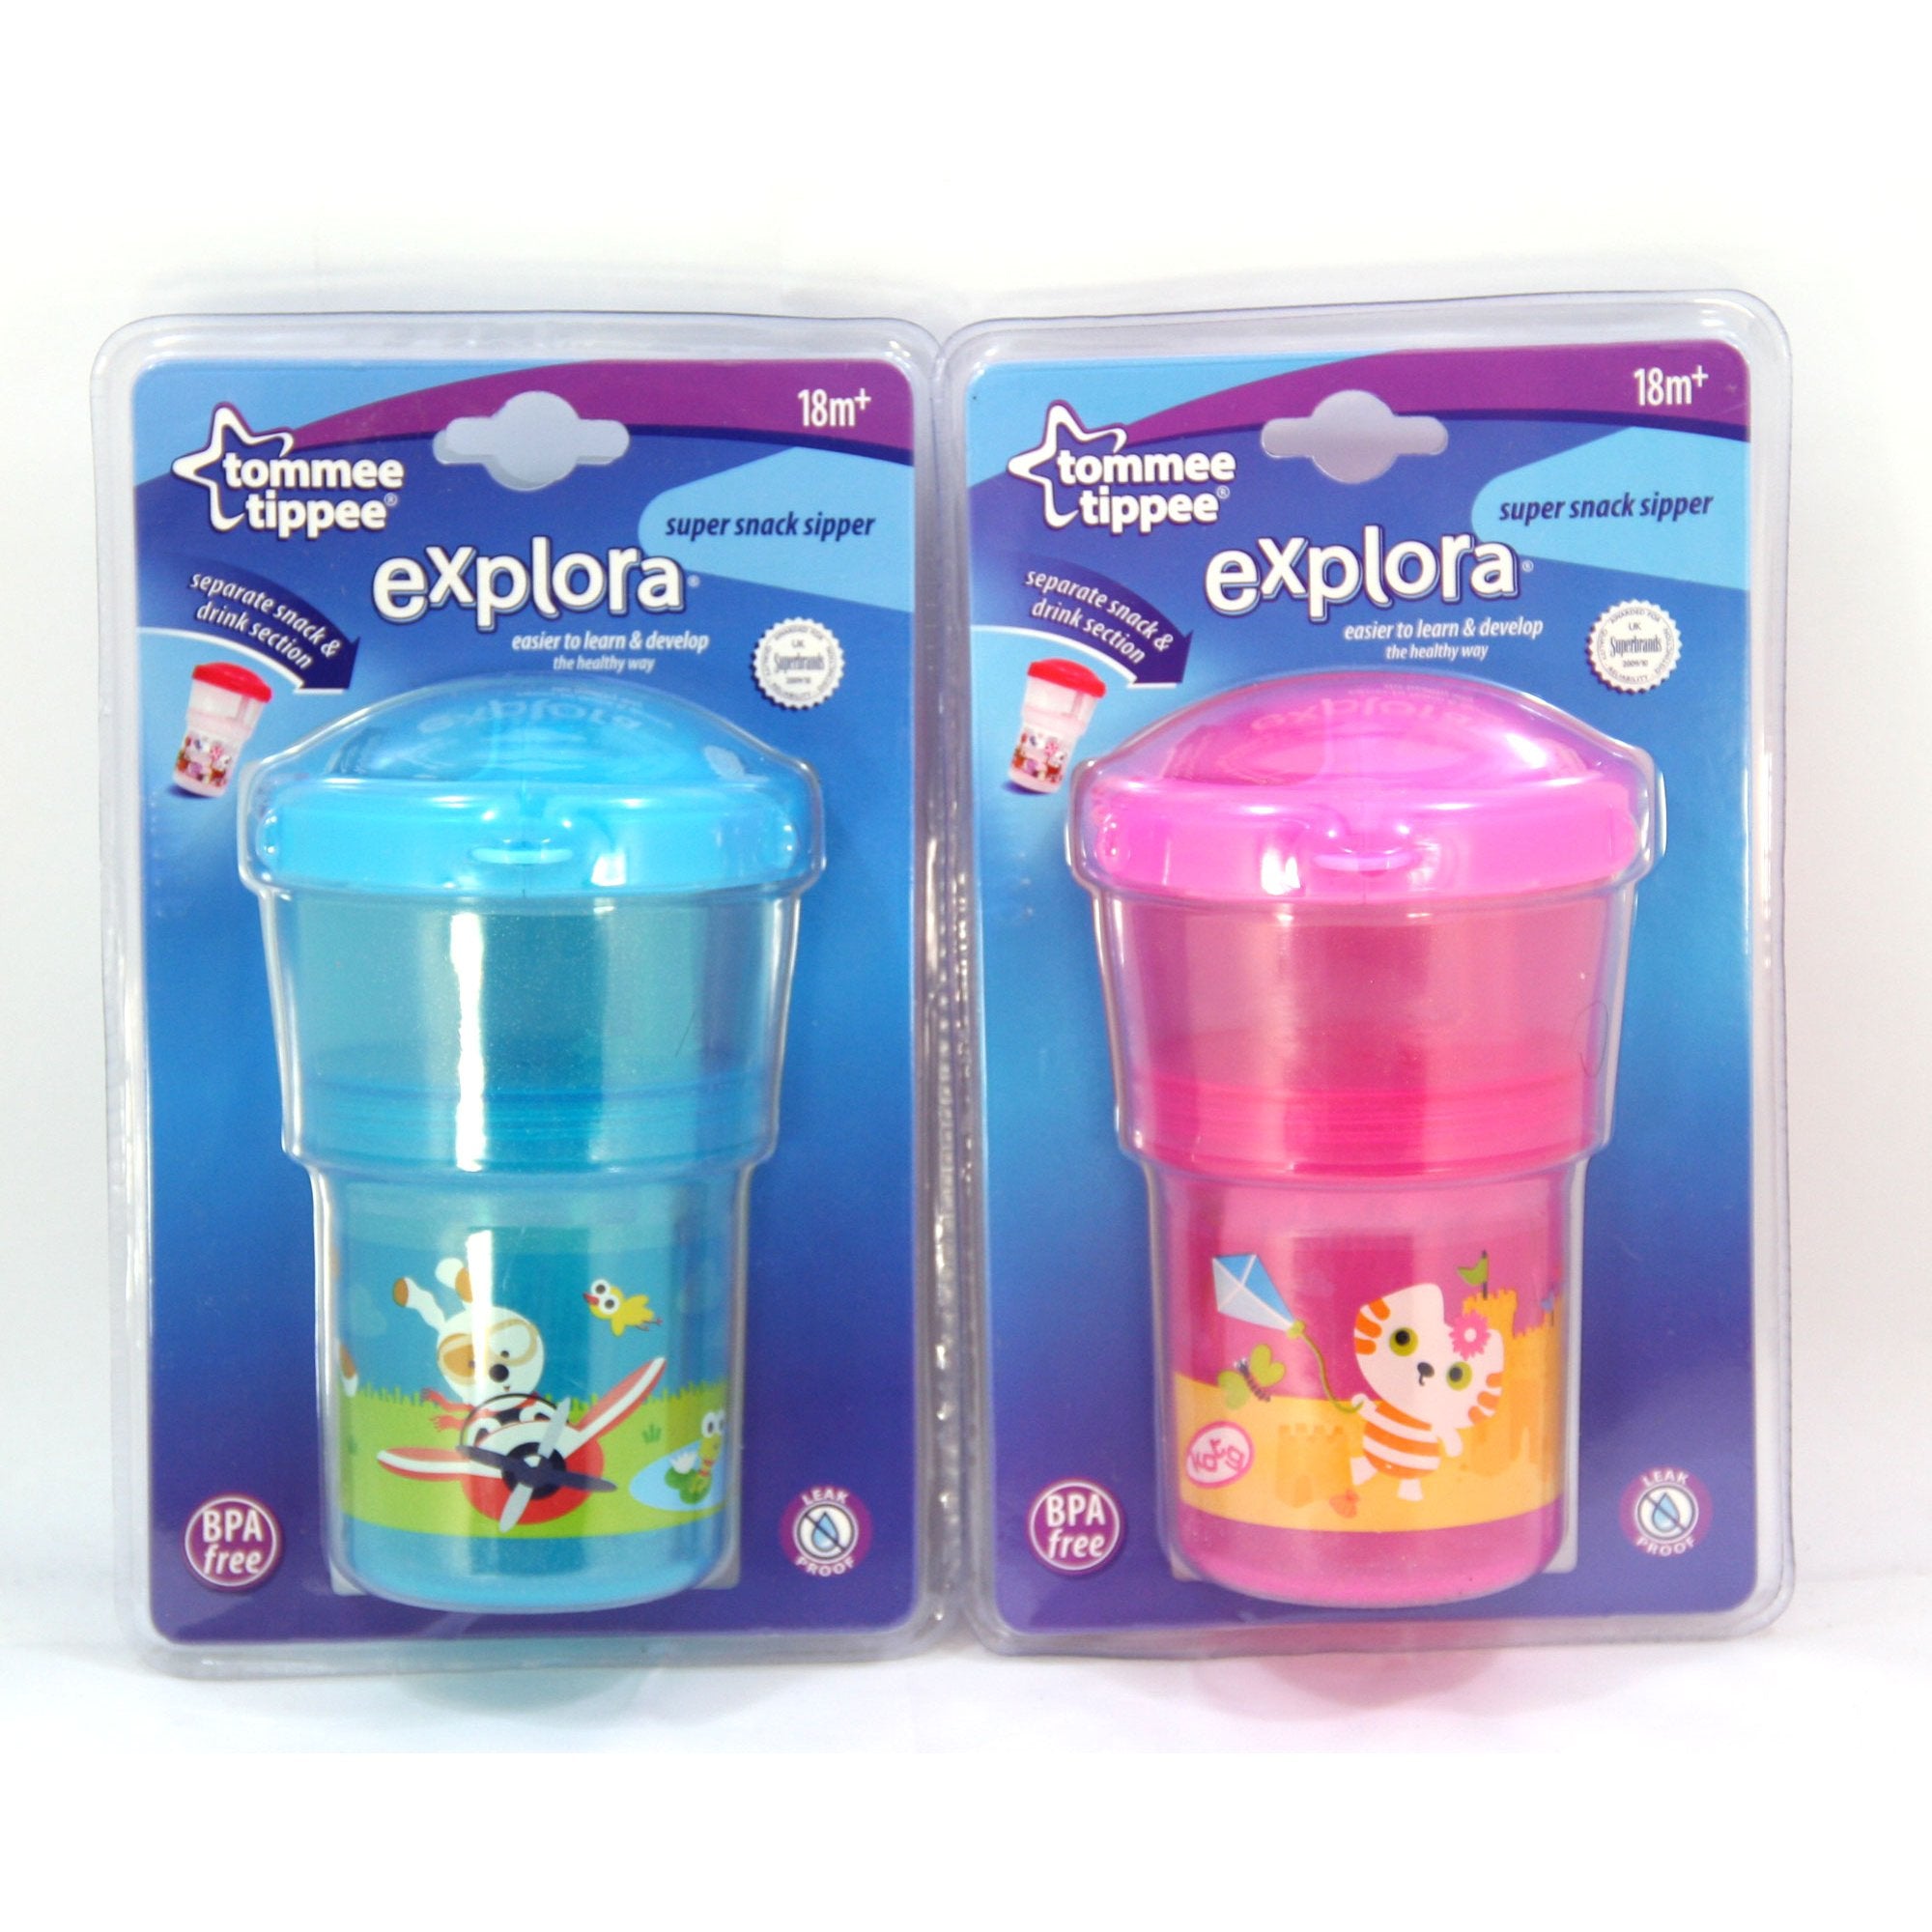 Tommee tippee super snack sipper